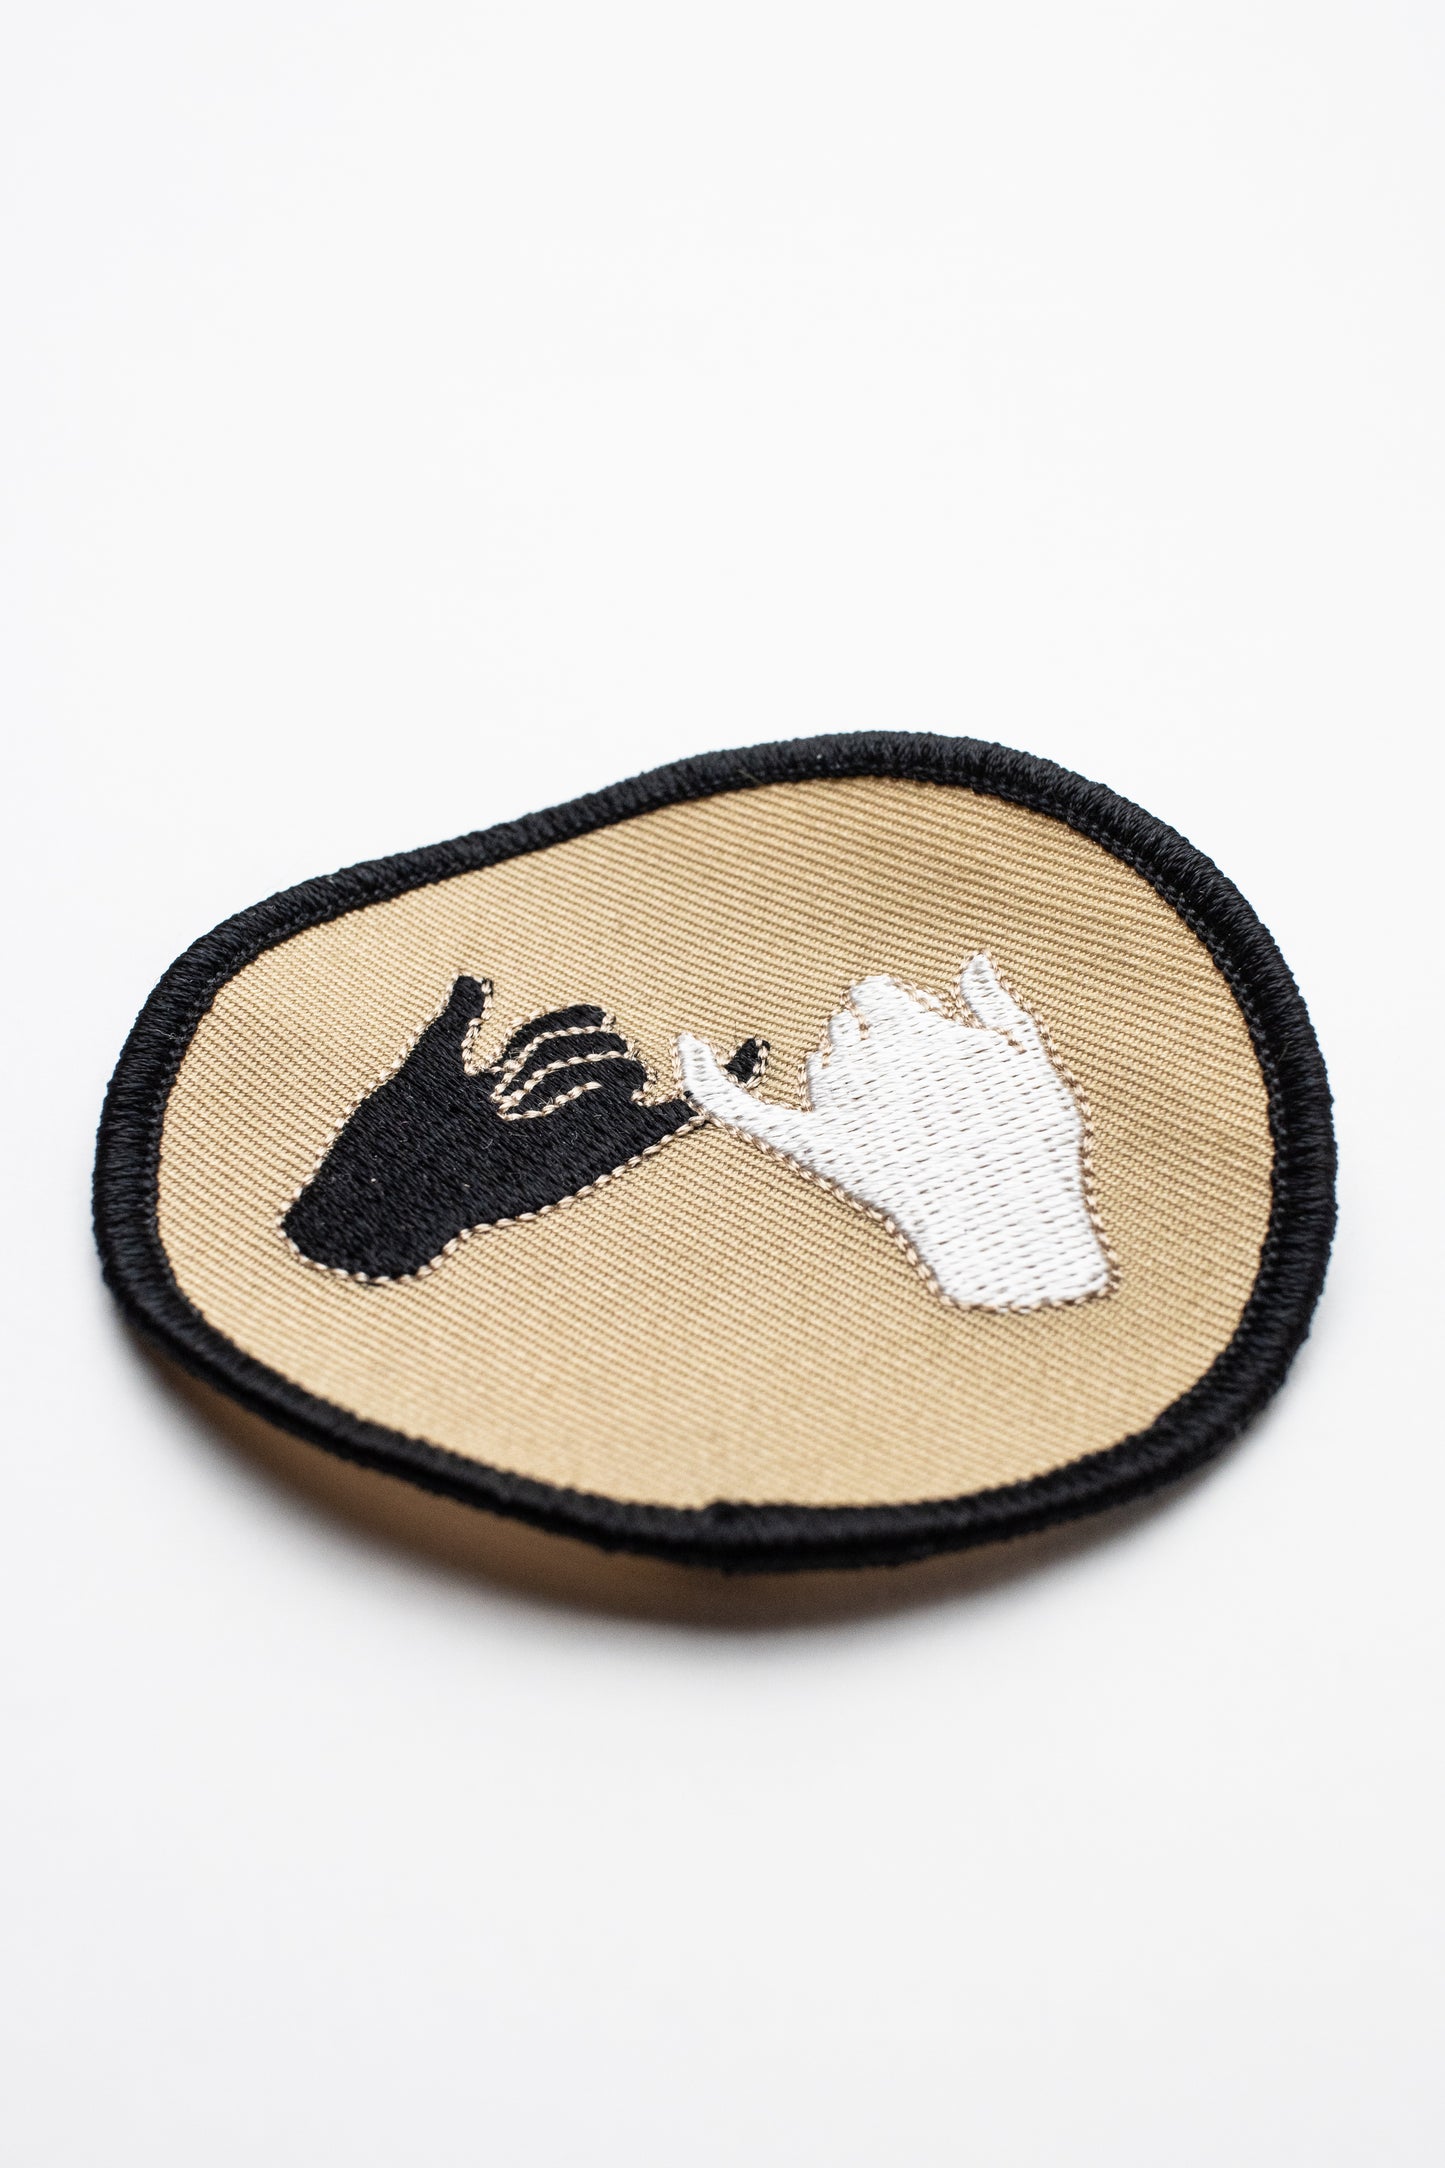 Embroidered Patch "Lucky Swear"